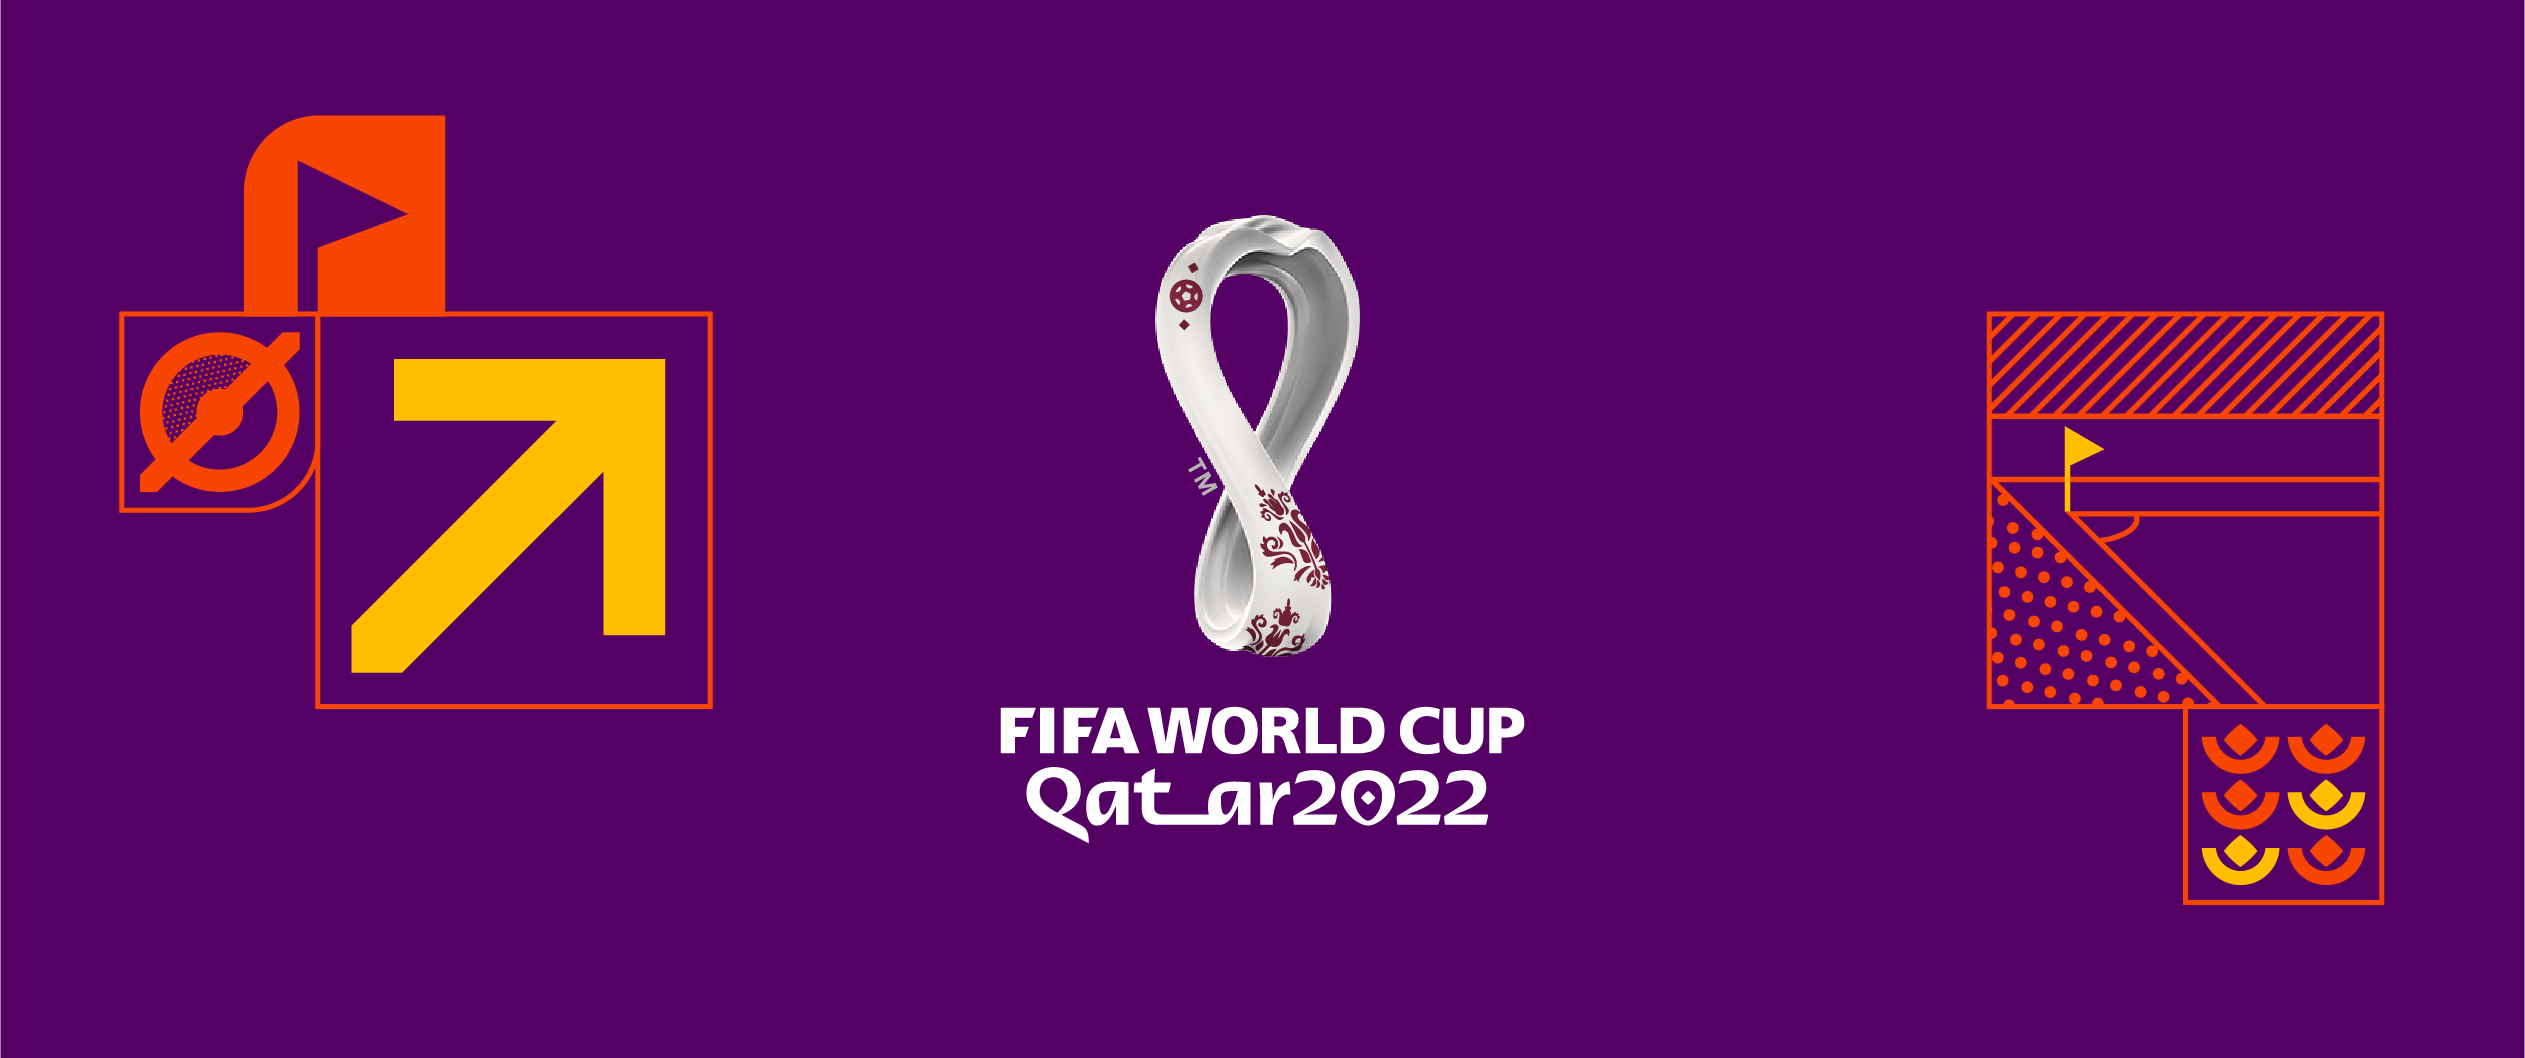 fifa world cup official website